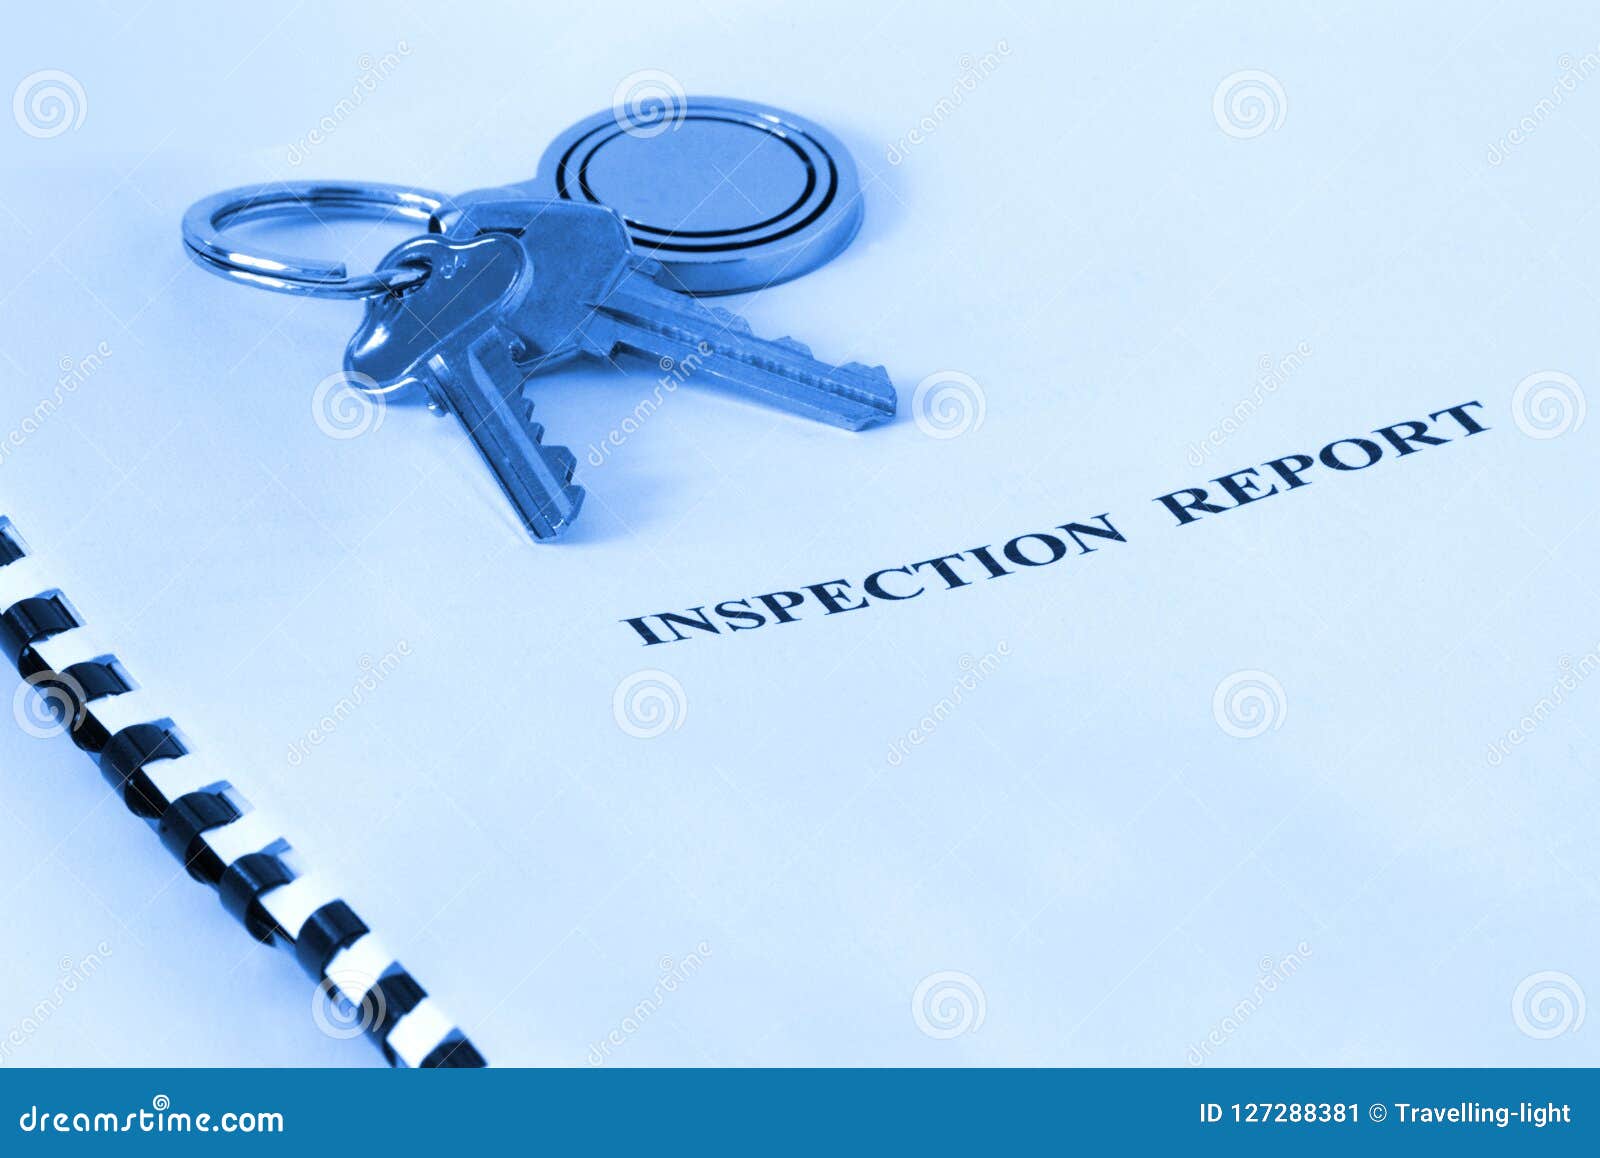 real estate - inspection report blue tone